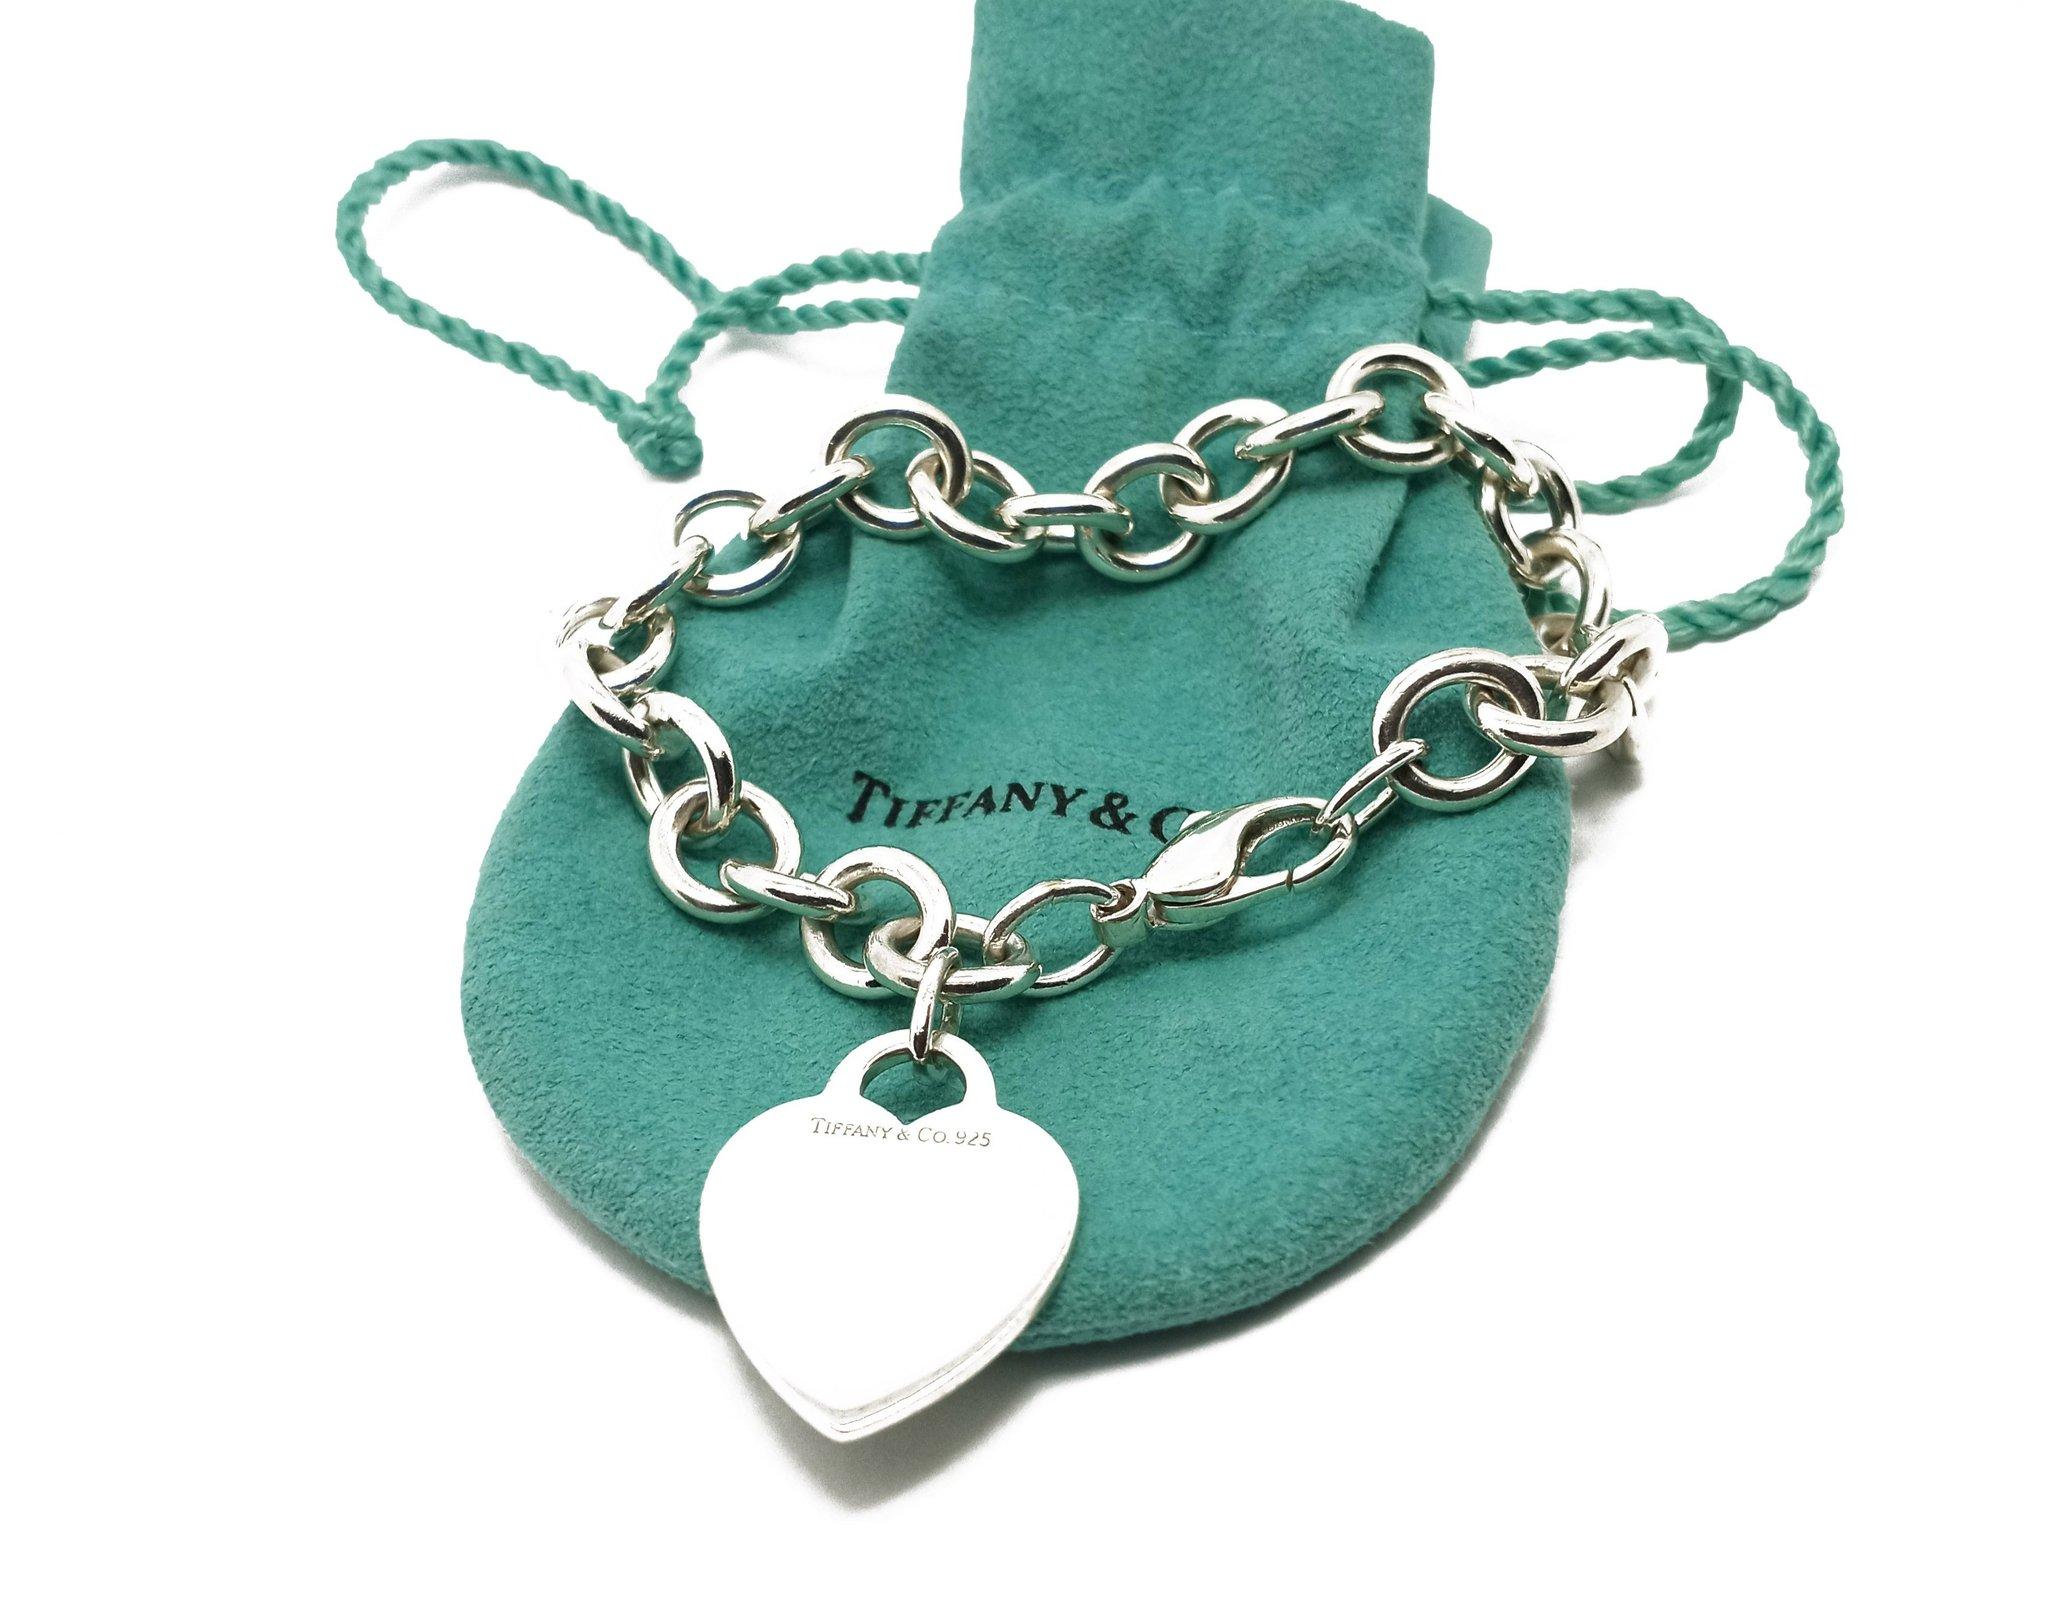 (Item Description)
Brand - Tiffany &Co.
Gender - Unisex
Condition - Pre-Owned 
Style - Heart Charm Bracelet  
Metals - .925 Silver
Weight - 34 Grams
Coating - 24K White Gold
Hall marks - Tiffany &Co. 925
length - 7 1/2 inches
(Tiffany Box & Pouch